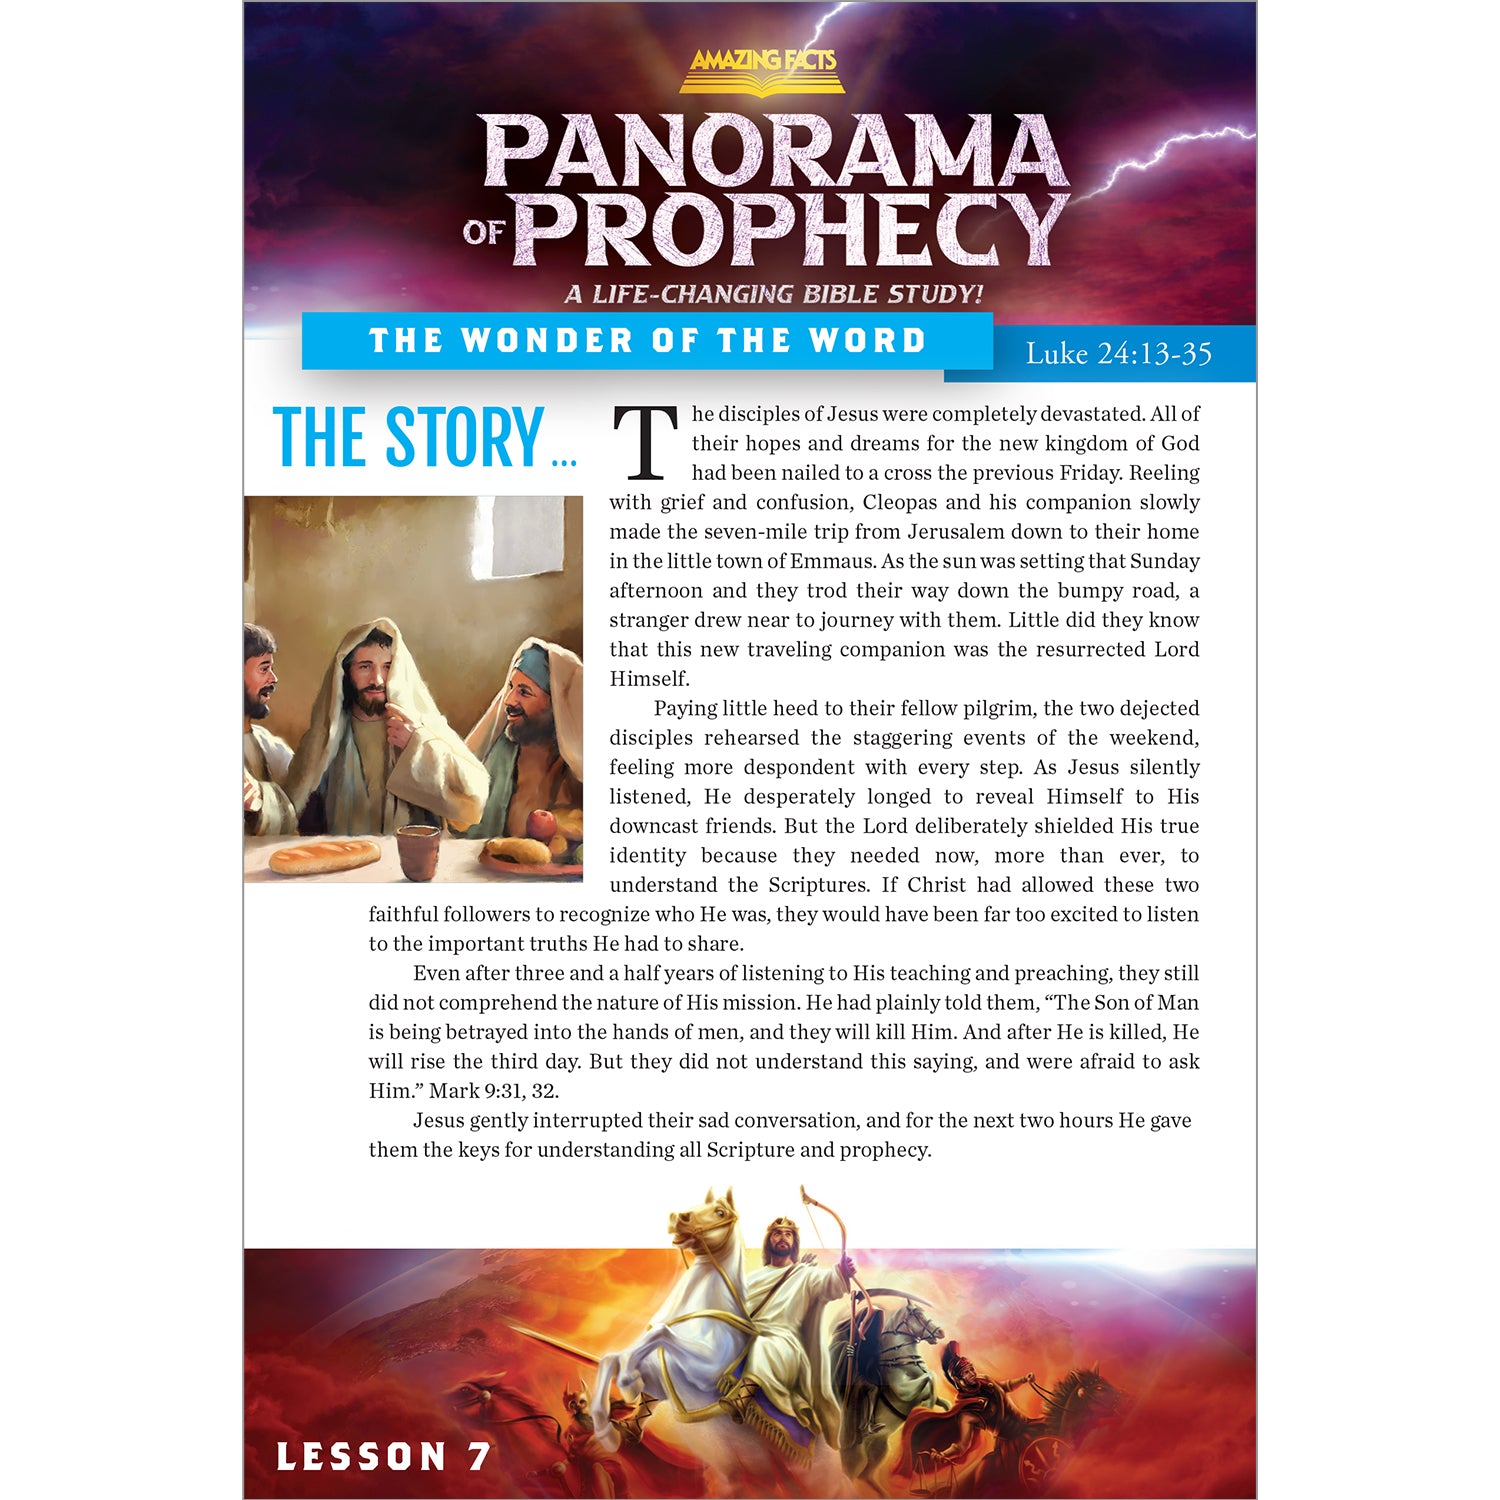 Panorama of Prophecy: The Wonder of the World Study Guide 07 by Doug Batchelor